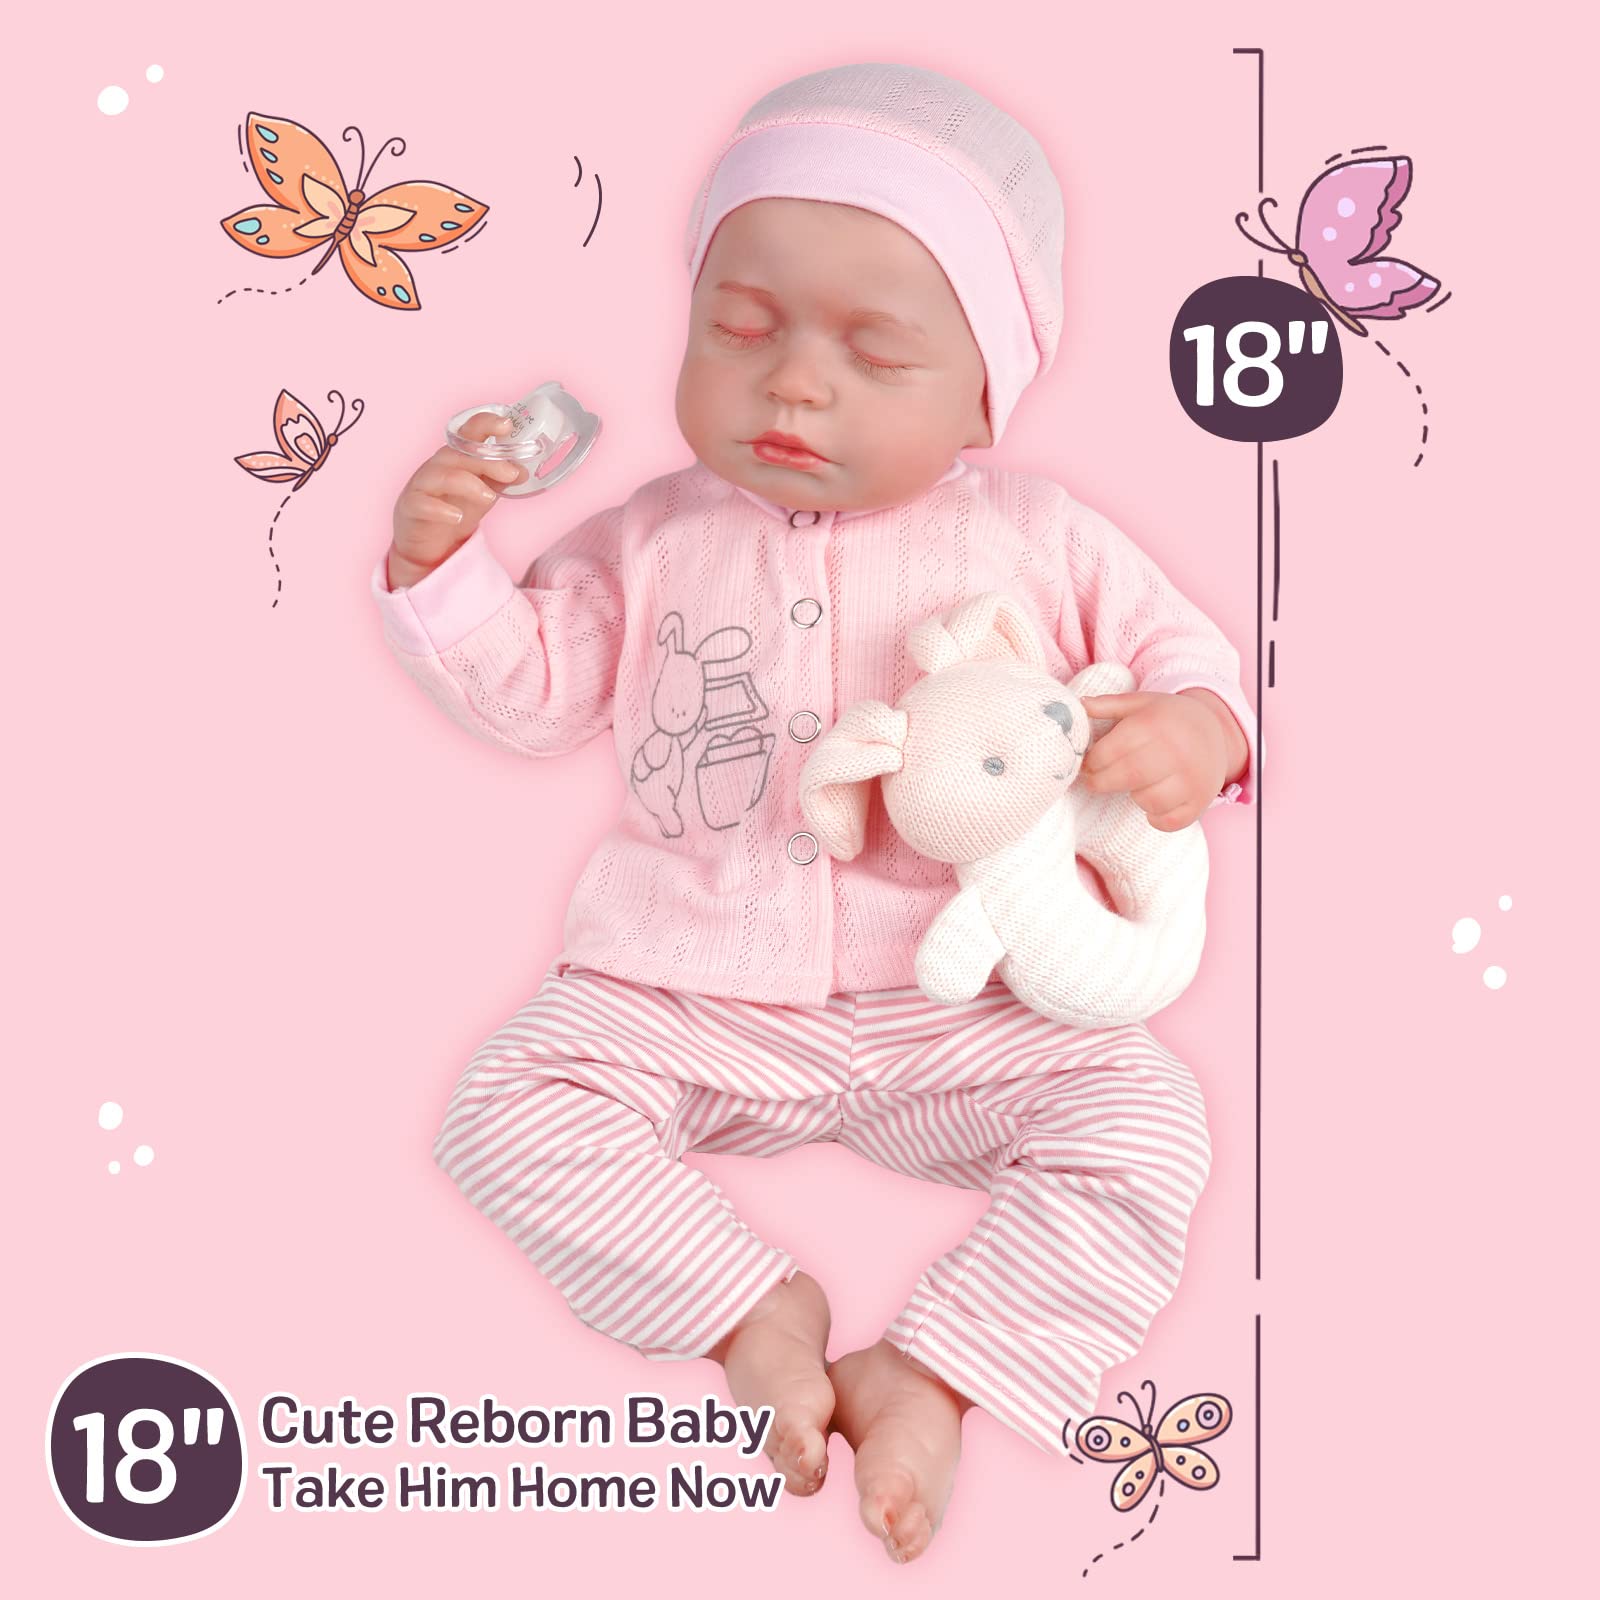 JIZHI Lifelike Reborn Baby Dolls - 18 Inch-Soft Body Realistic-Newborn Baby Dolls American Sleeping Girl Real Life Dolls with Clothes and Toy Accessories Gift for Kids Age 3+